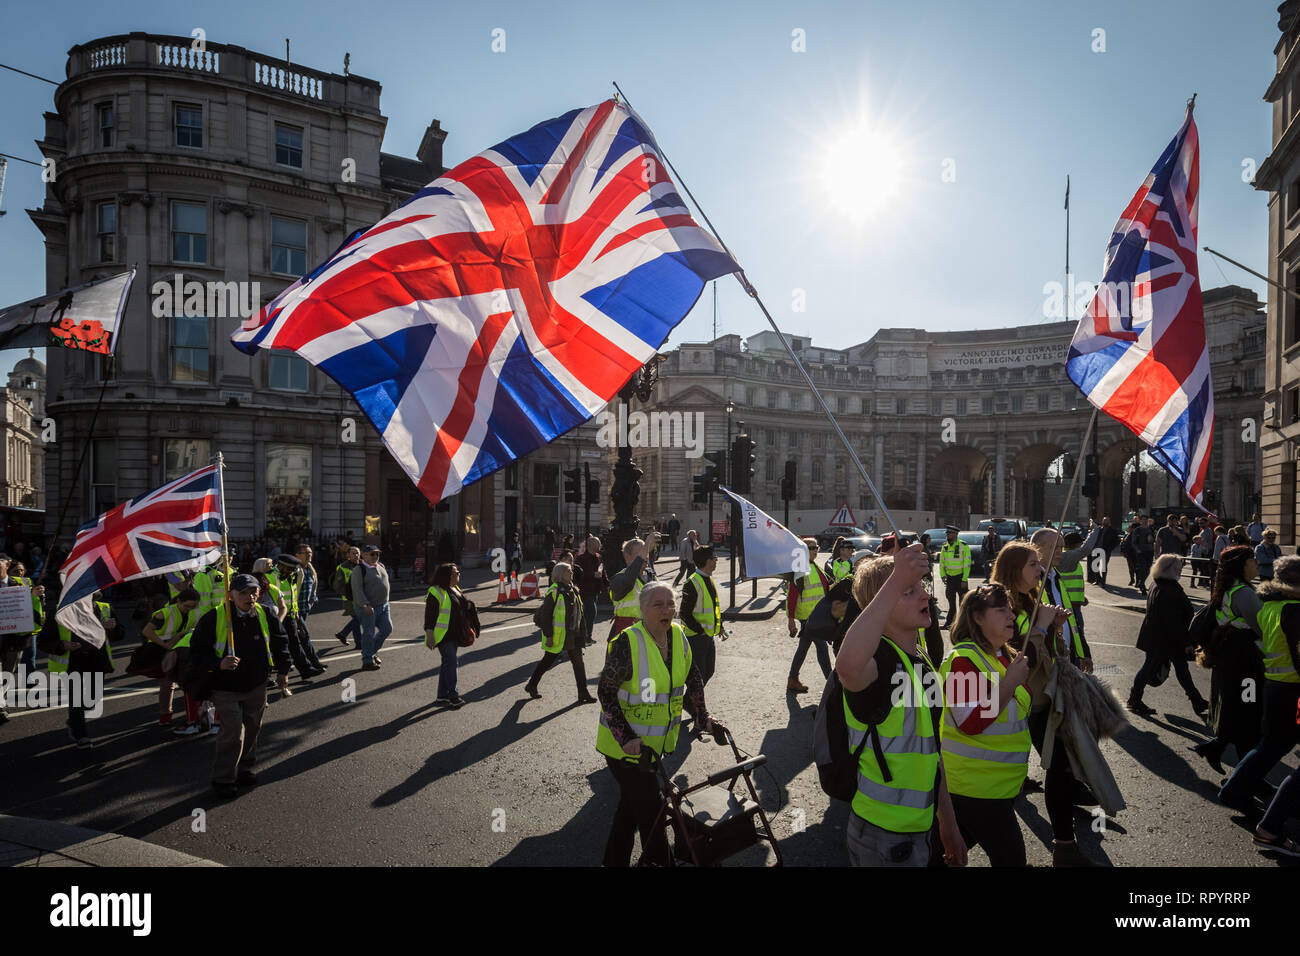 London, UK. 23rd February, 2019. Pro-Brexit protesters calling themselves the 'Yellow Vests UK' movement block roads and traffic whilst protest marching through Westminster. The right-wing nationalists briefly clashed with police and angry drivers whilst aggressively demanding Britain leave the EU without an exit deal. Credit: Guy Corbishley/Alamy Live News Stock Photo